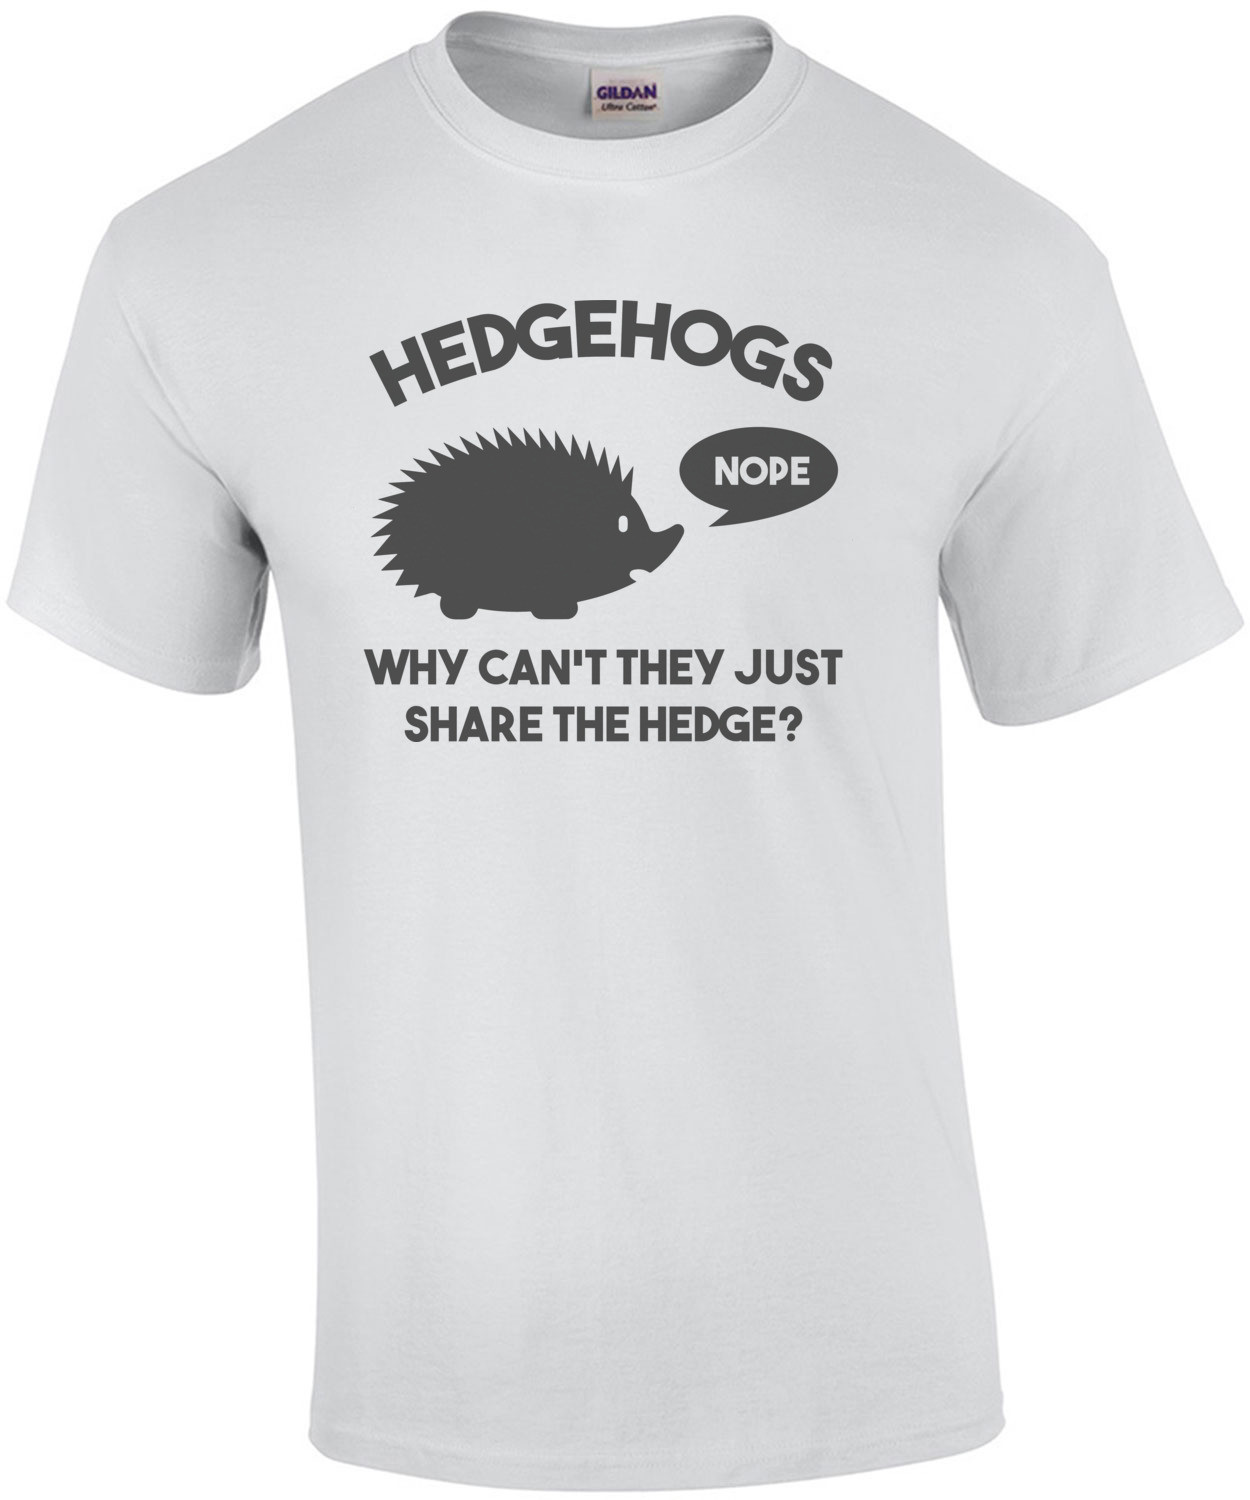 Hedgehogs - why can't they just share the hedge?